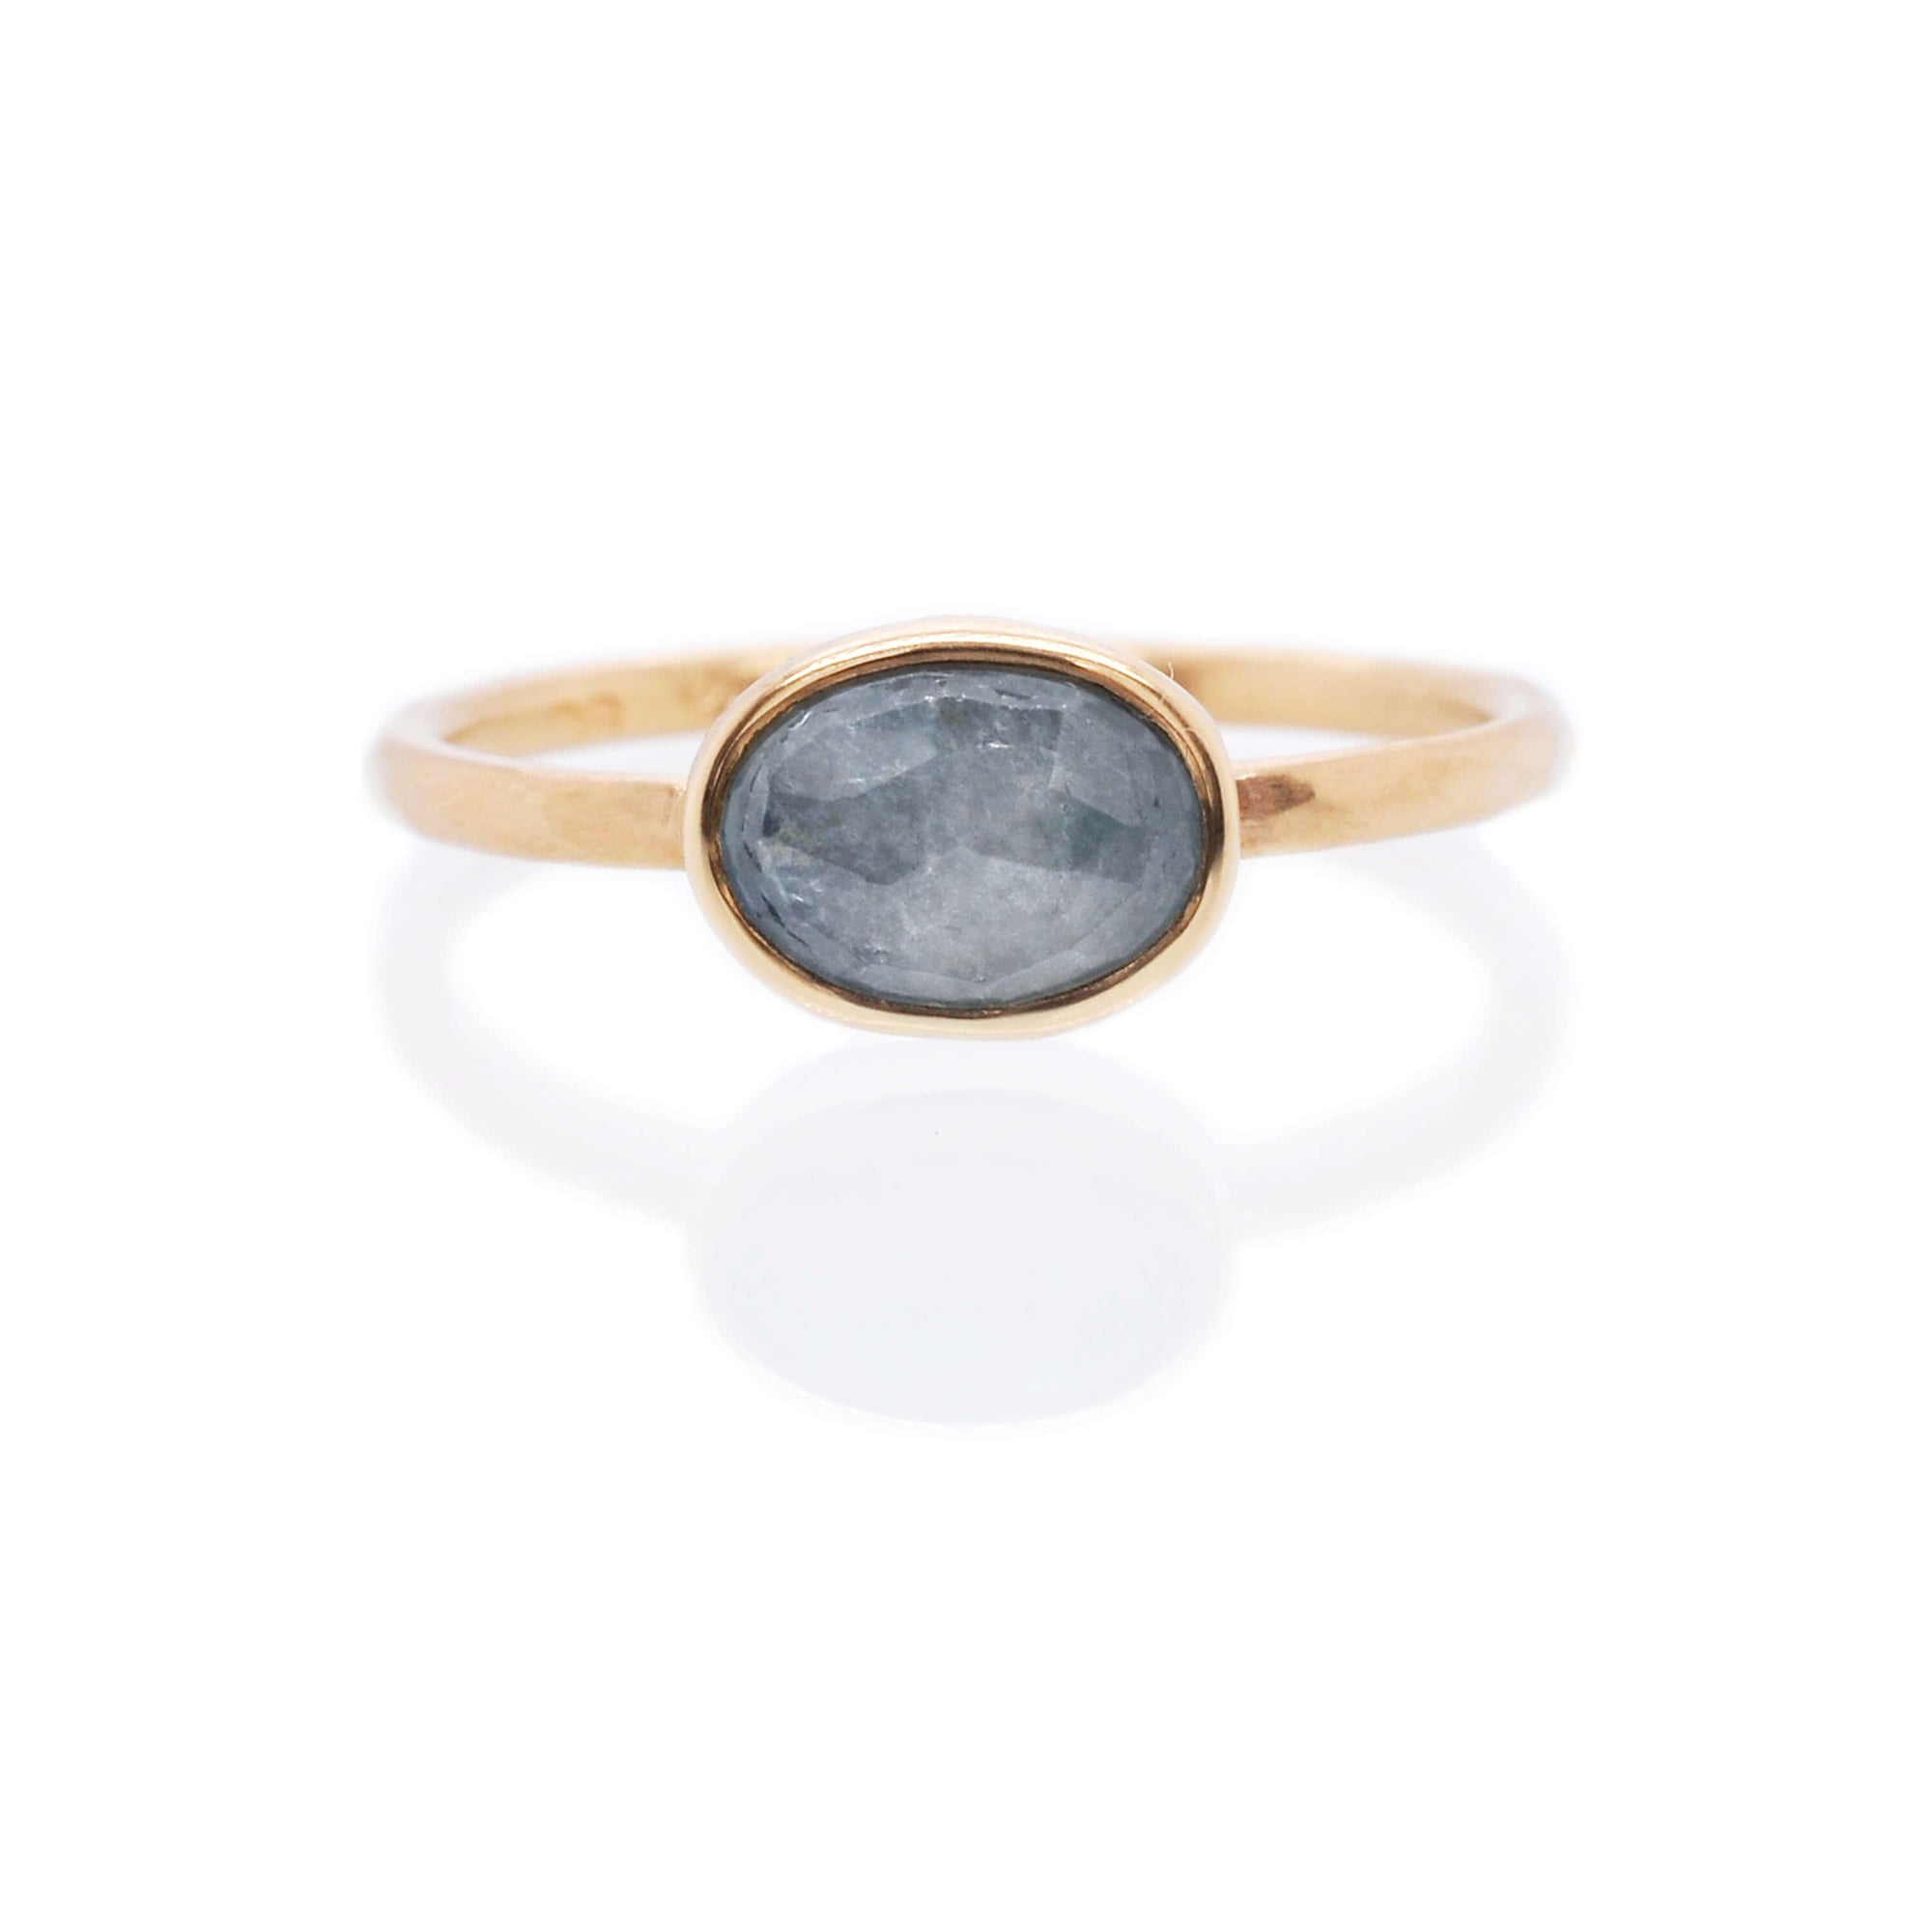 Low profile blue sapphire engagement ring in yellow gold. Handmade by EC Design Jewelry in Minneapolis, MN using recycled metal and conflict-free stone.